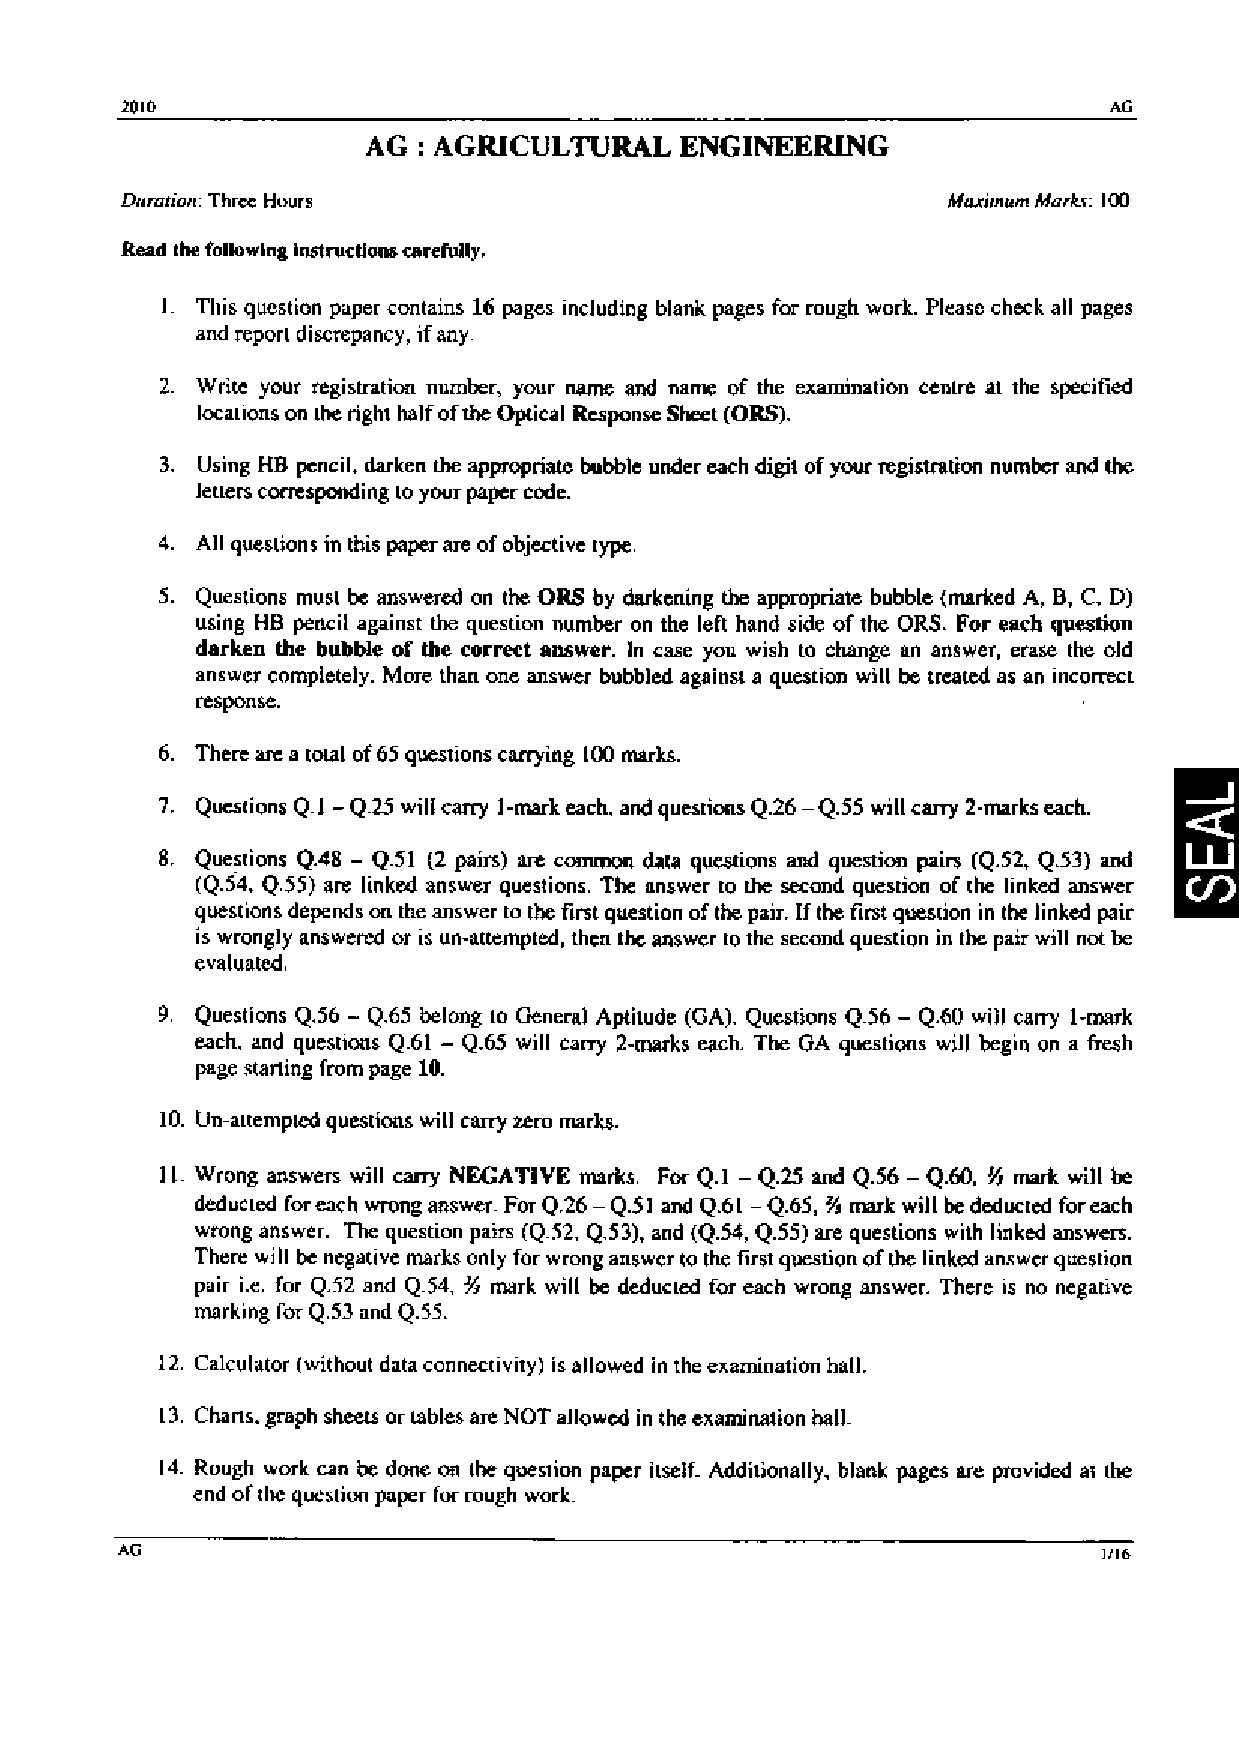 GATE Exam Question Paper 2010 Agricultural Engineering 1